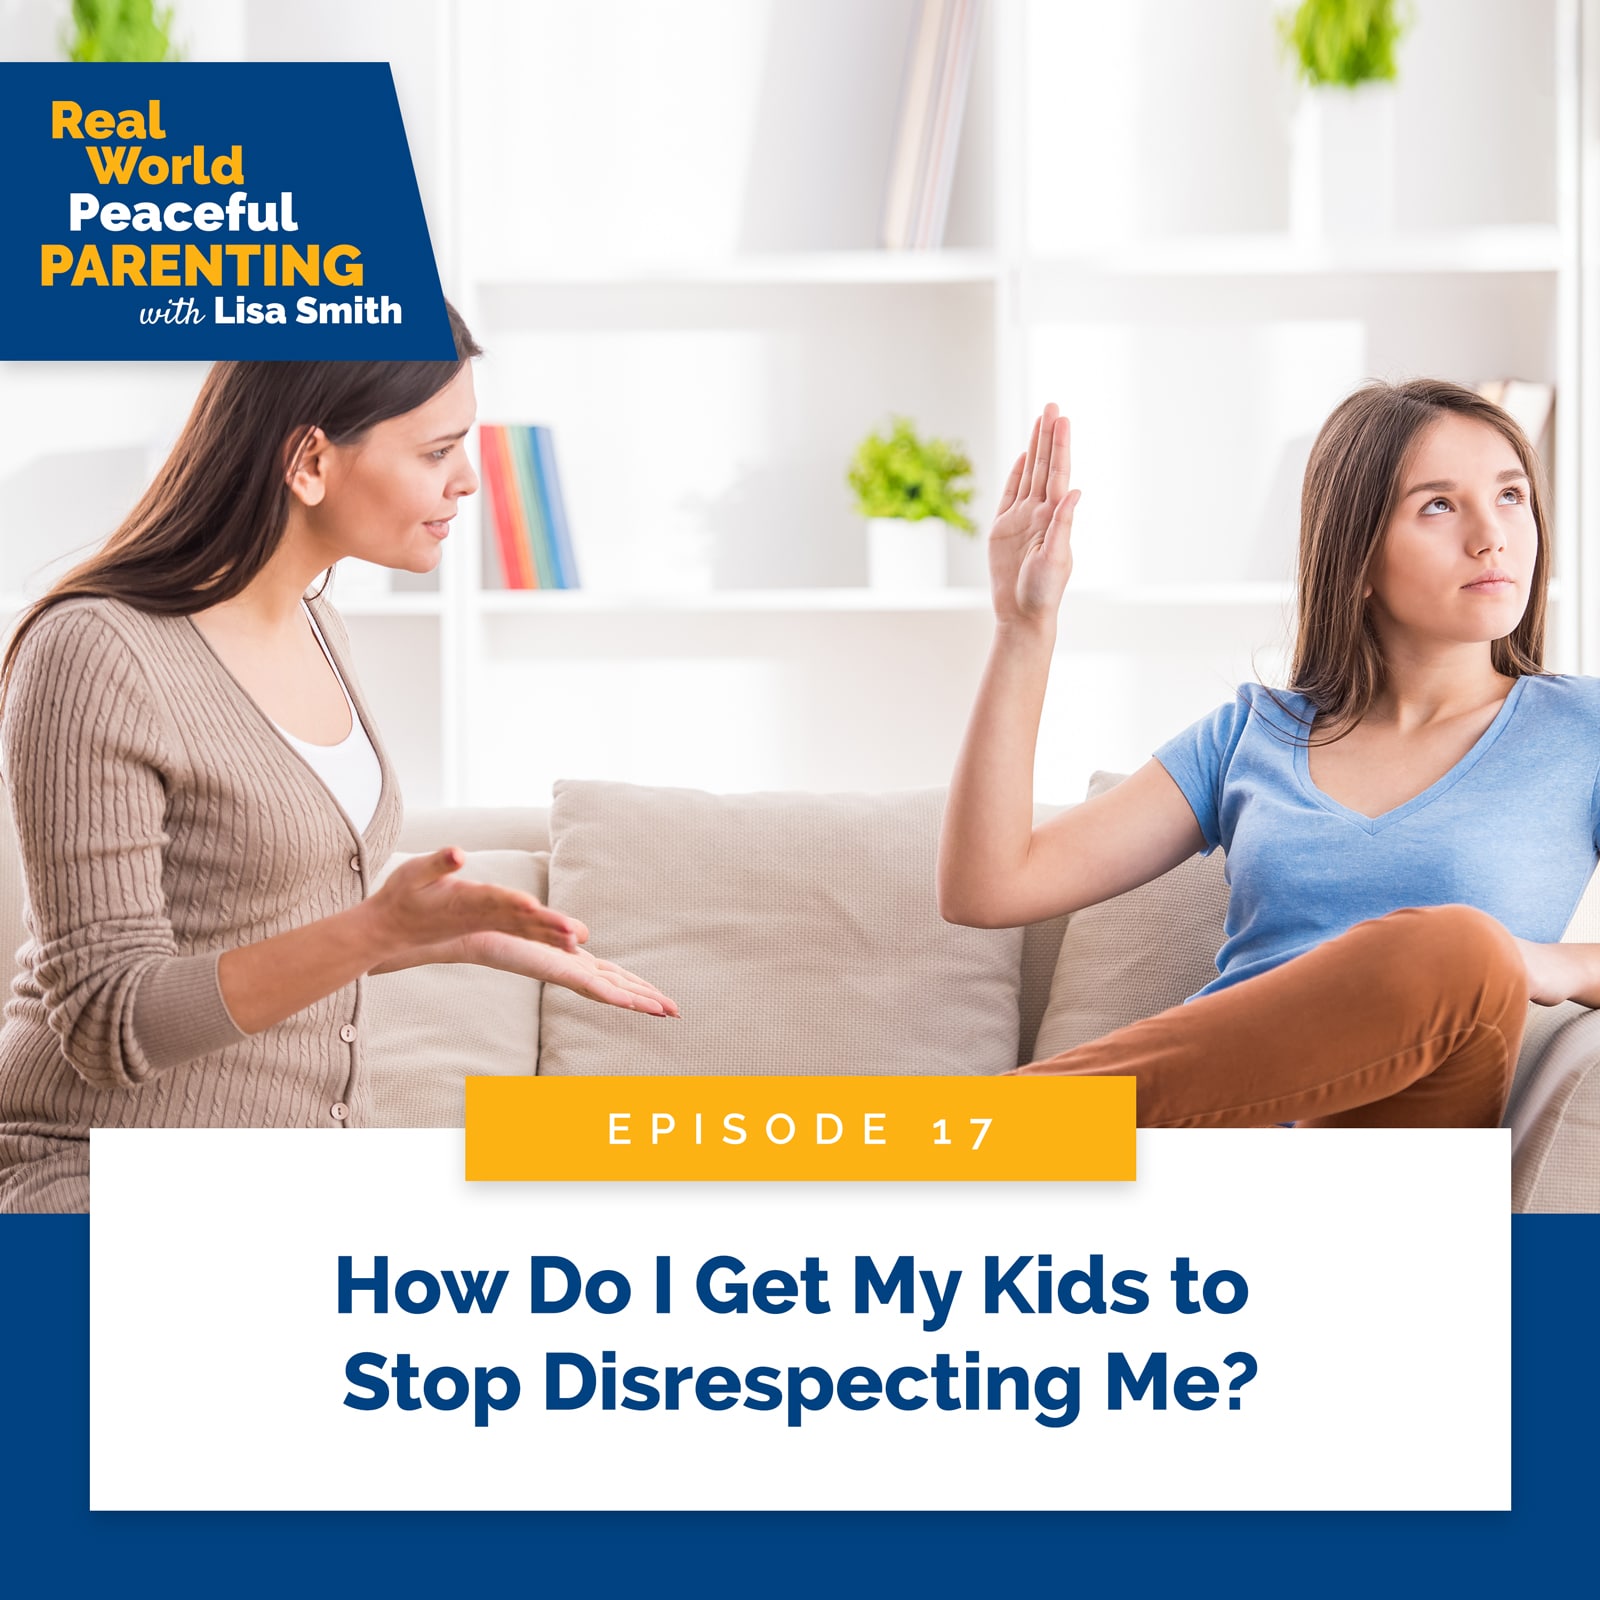 Real World Peaceful Parenting with Lisa Smith | How Do I Get My Kids to Stop Disrespecting Me?